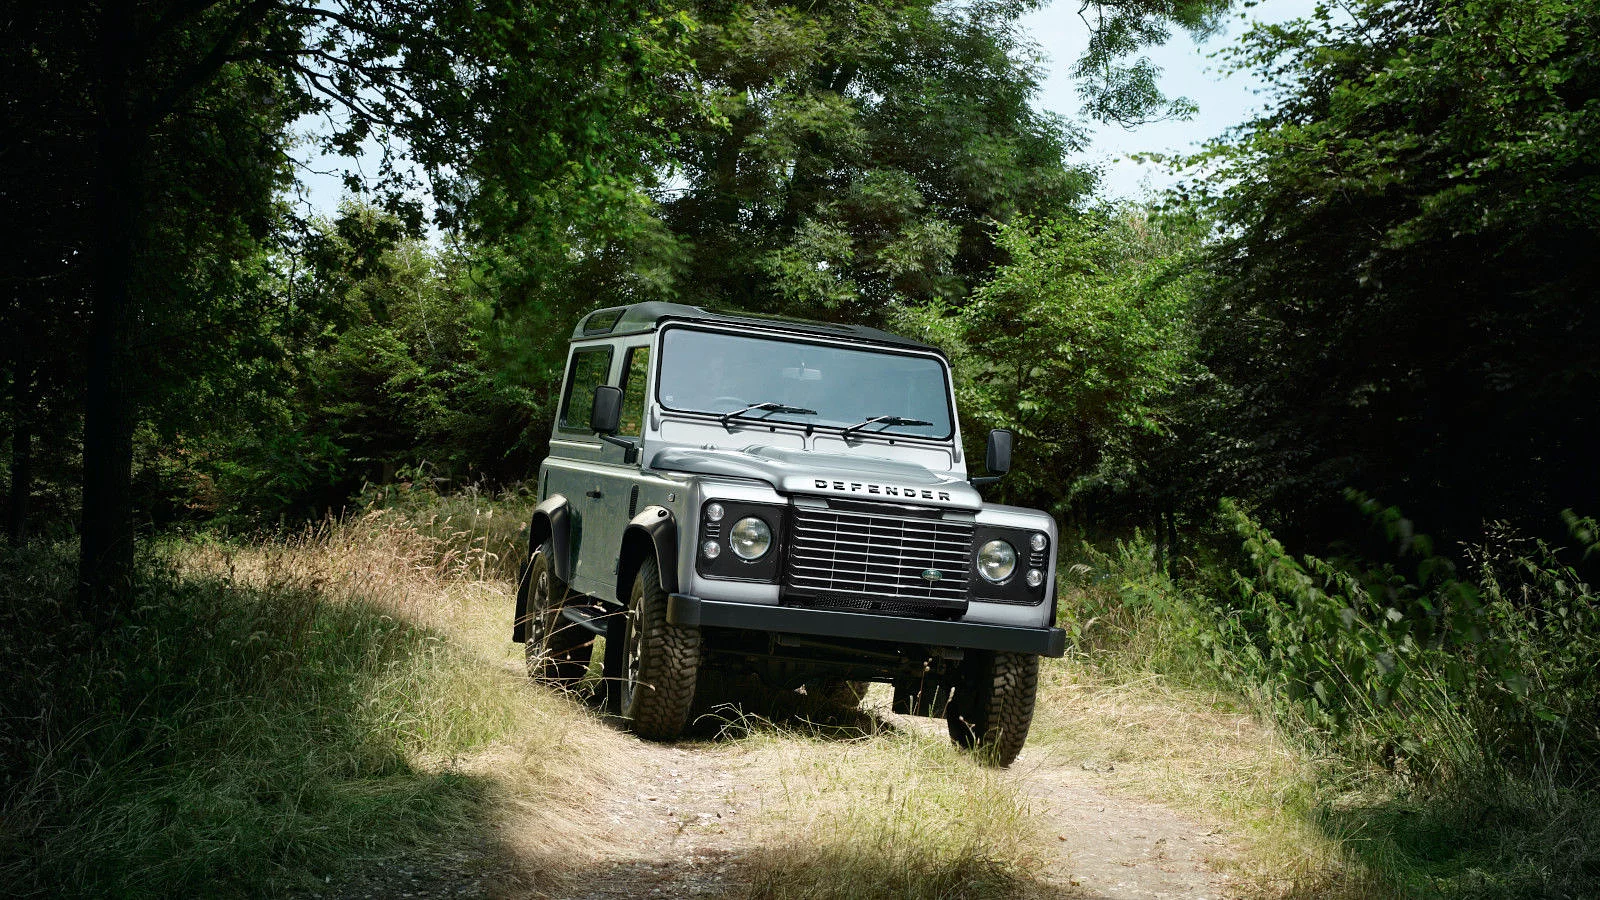 LAND ROVER PARTS FOR CLASSIC CARS